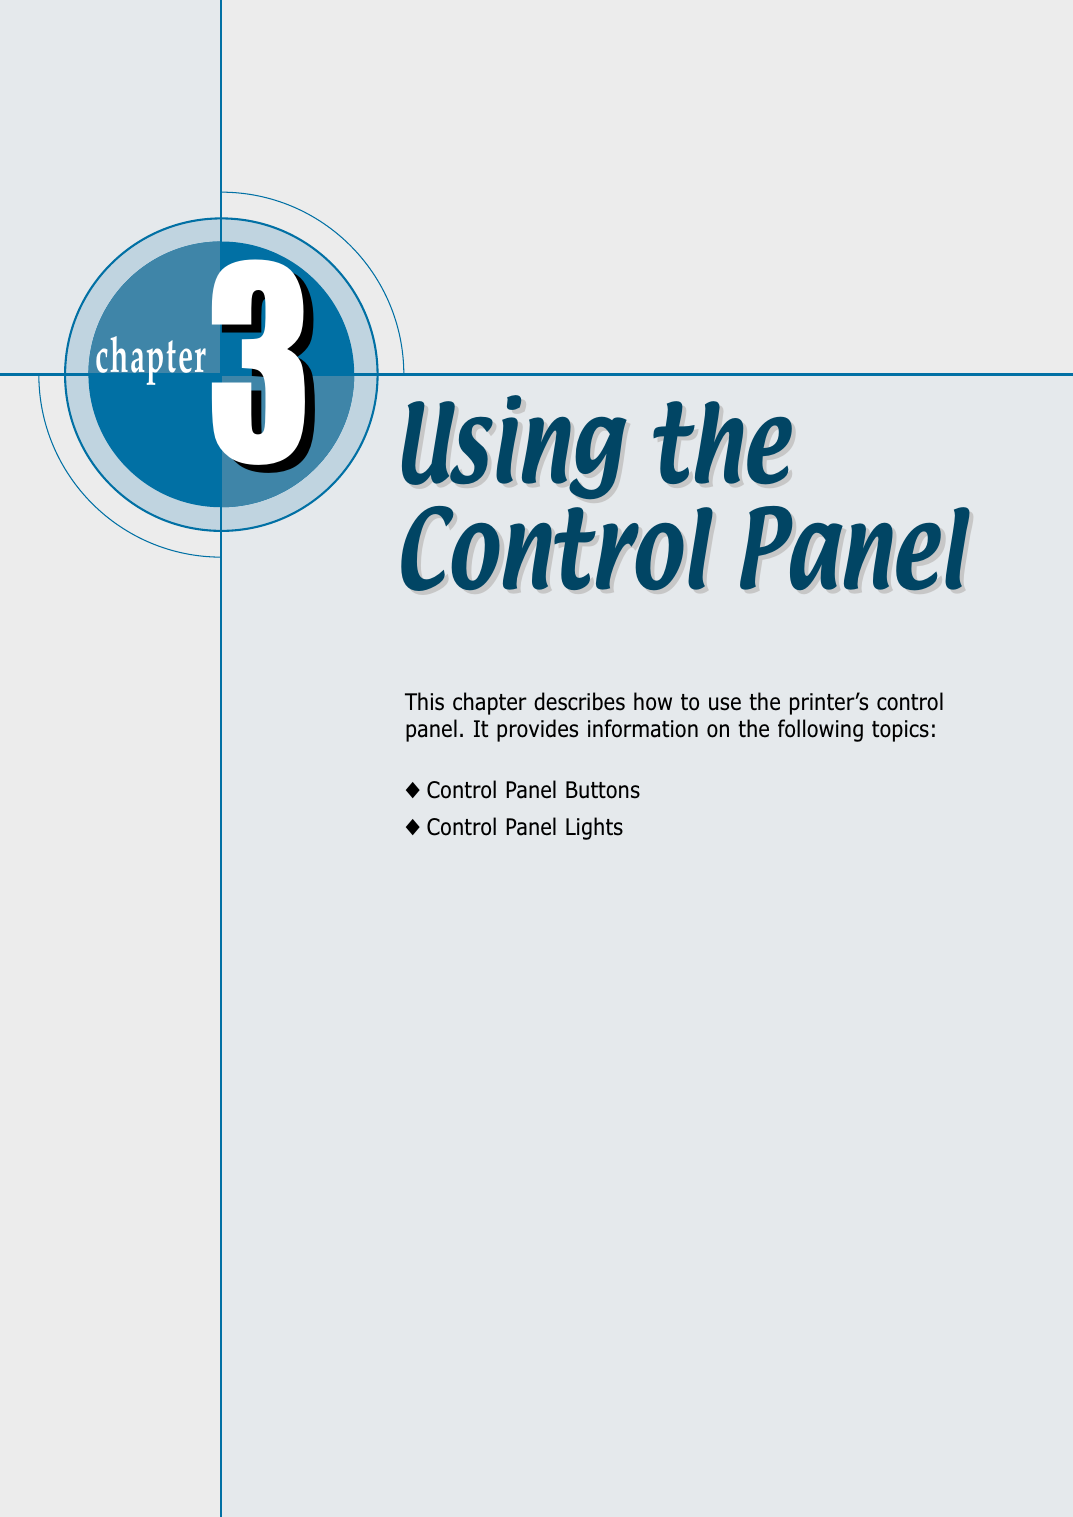 chapter  This chapter describes how to use the printer’s controlpanel. It provides information on the following topics:◆Control Panel Buttons◆Control Panel Lights33Using theControl PanelUsing theControl Panel